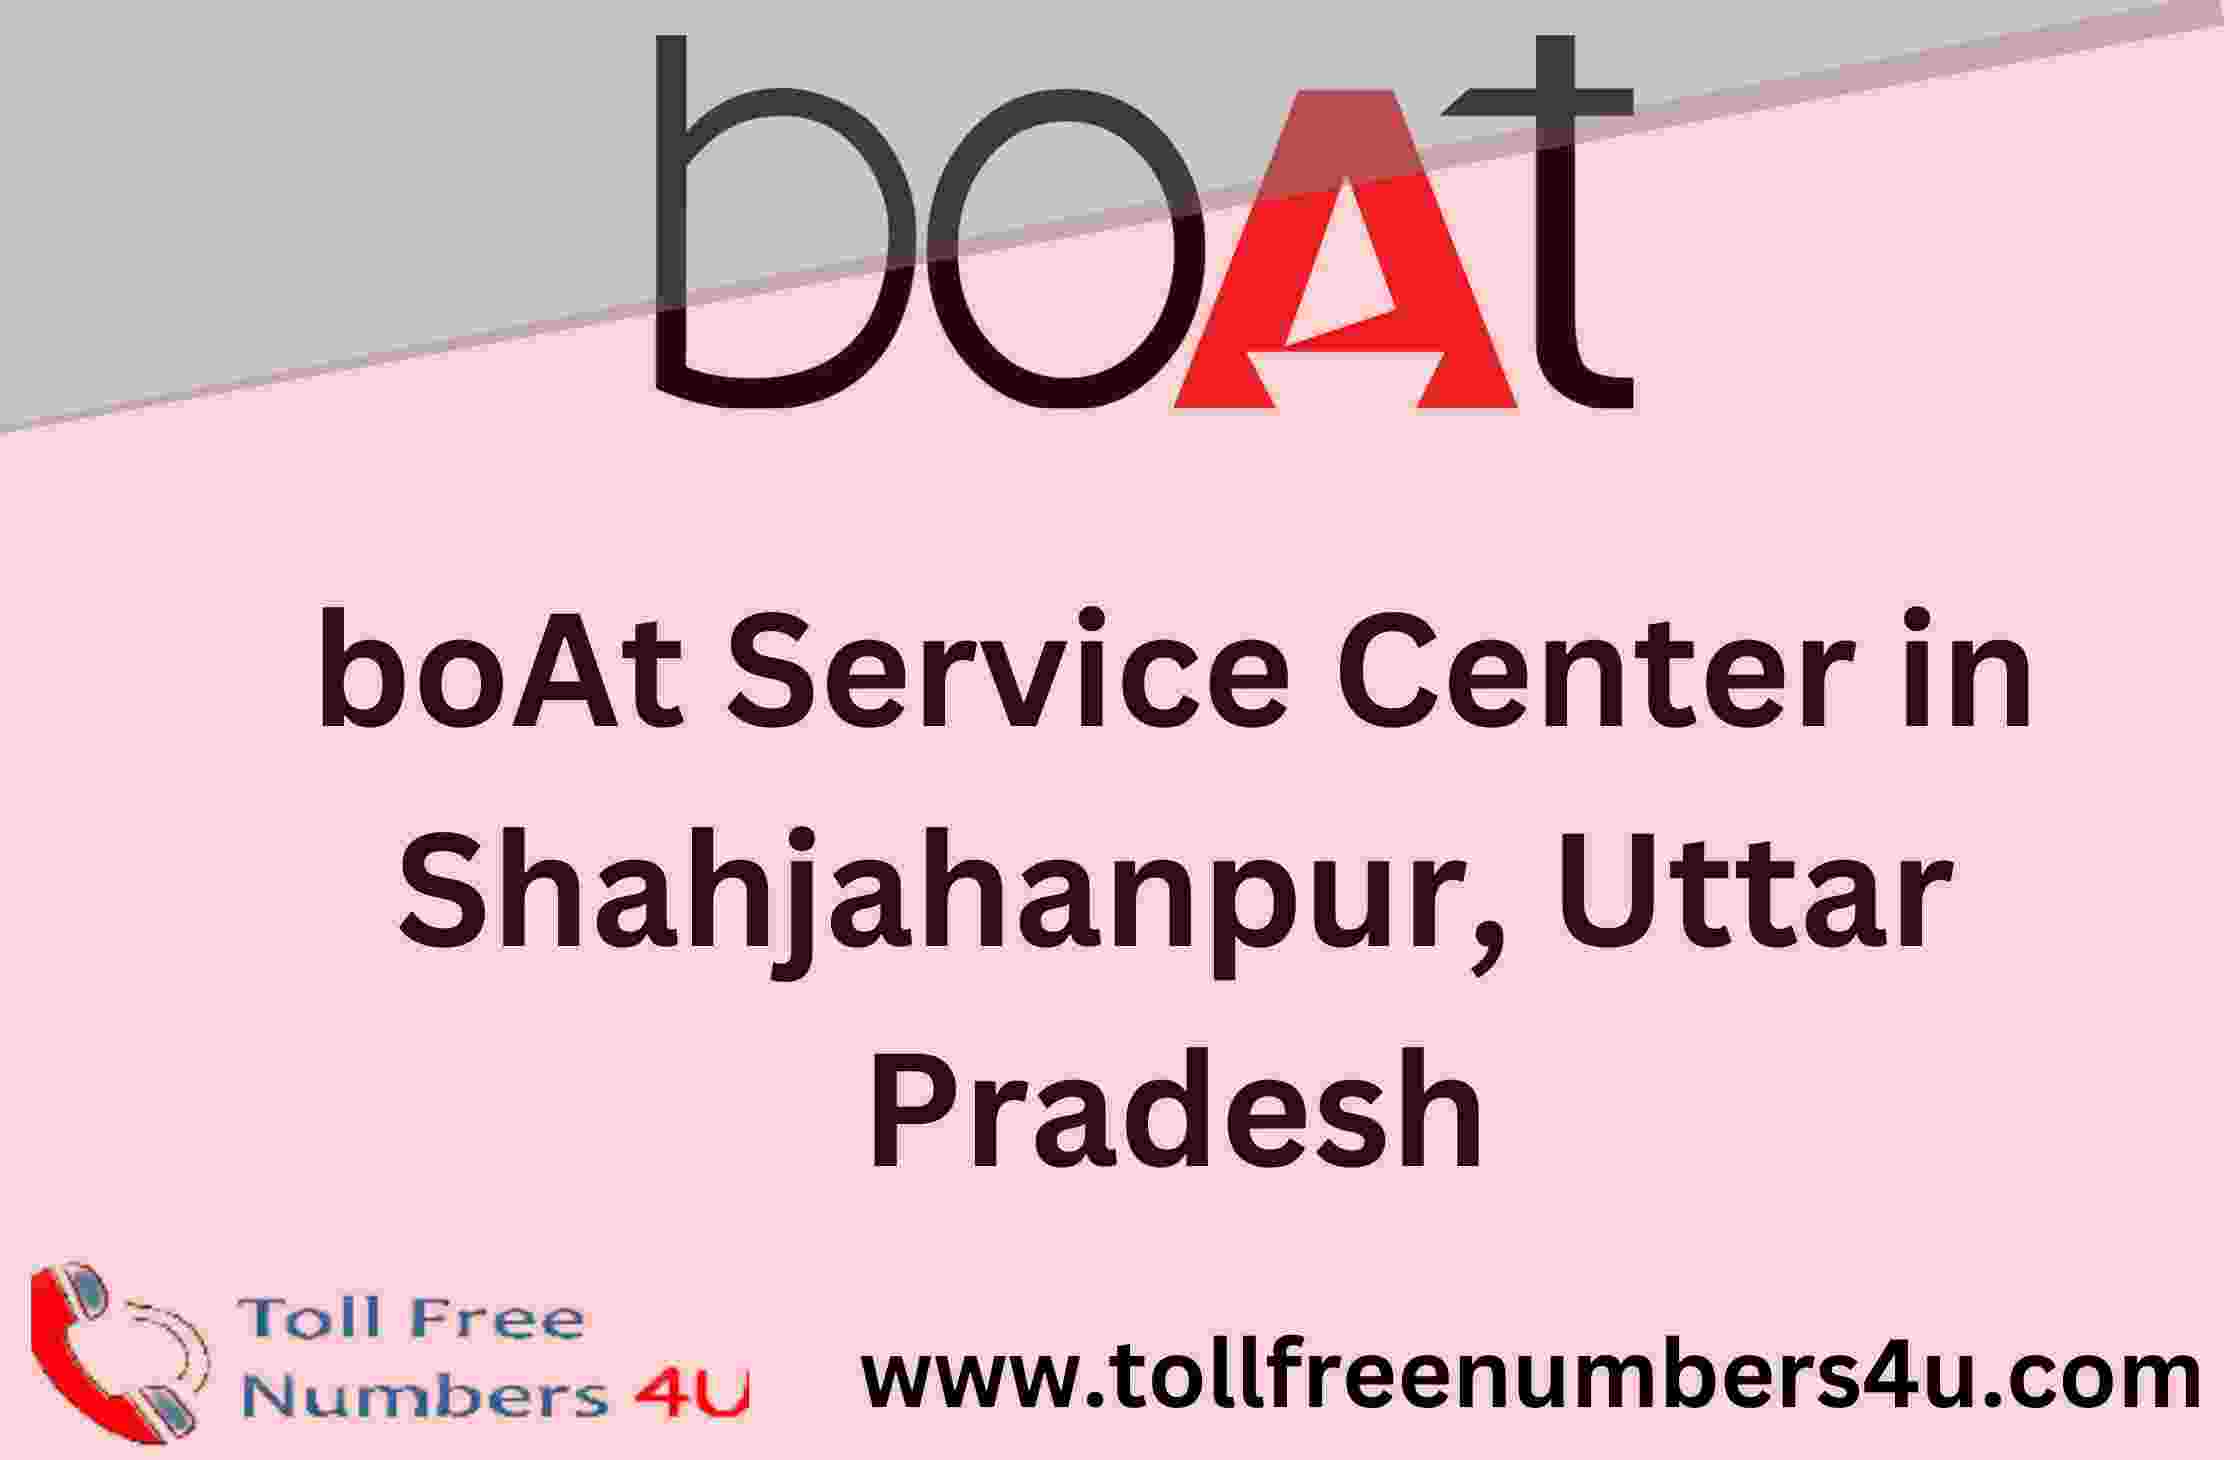 boAt Service Center in Shahjahanpur - TollFreeNumbers4u